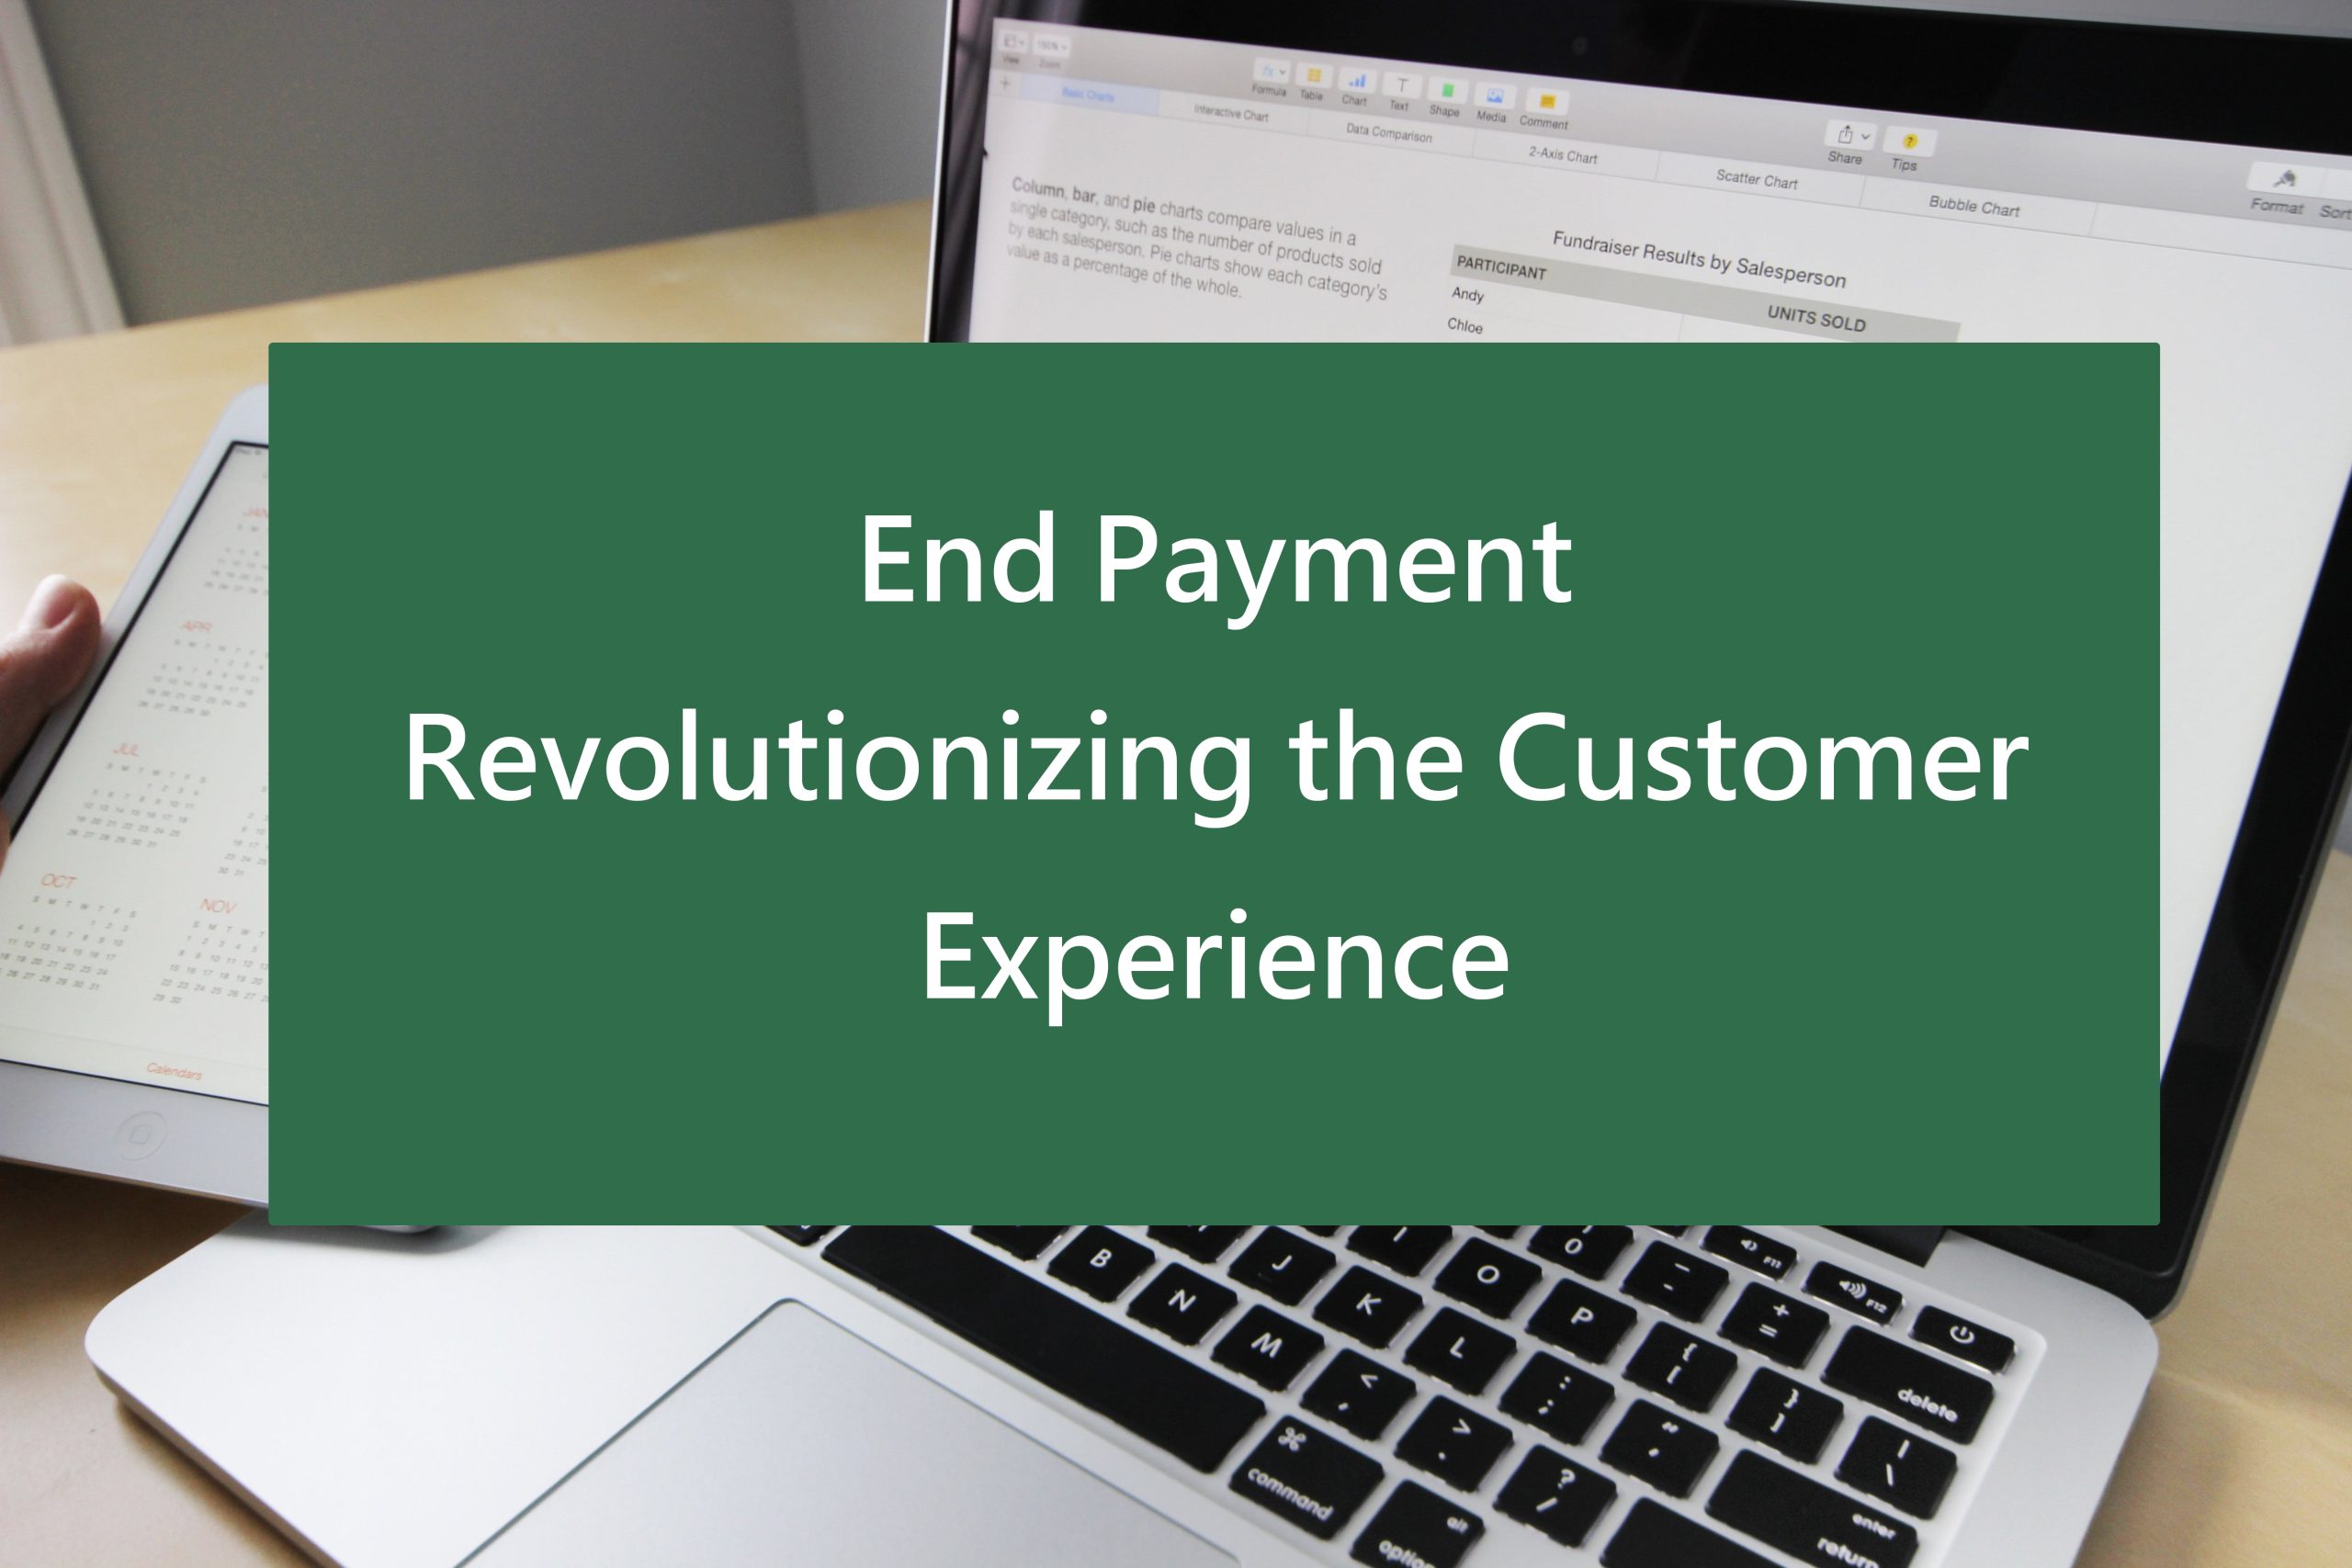 End Payment: Revolutionizing the Customer Experience